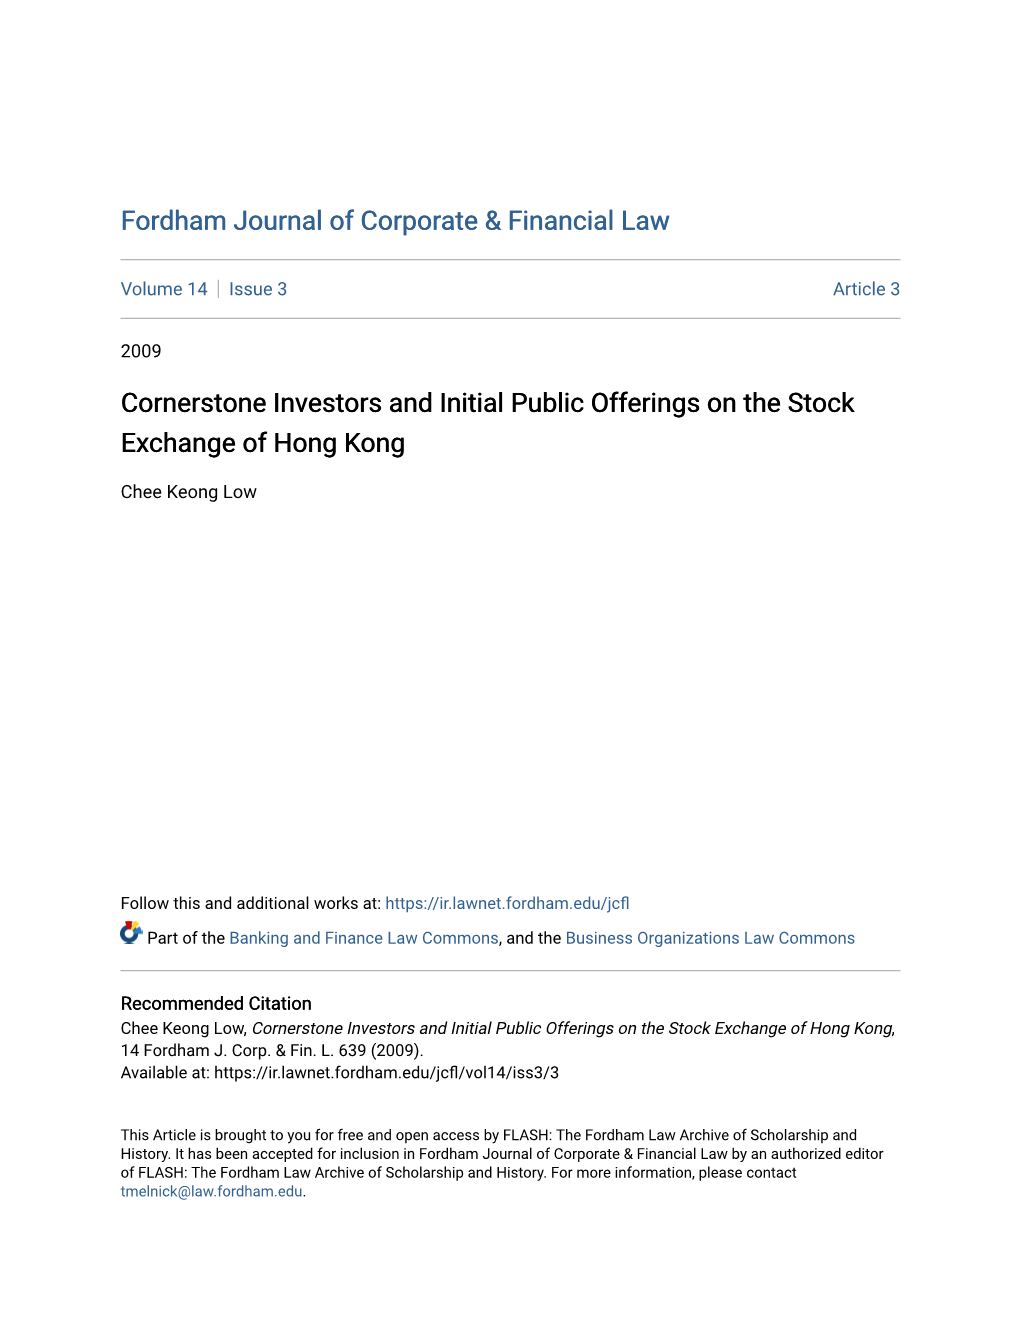 Cornerstone Investors and Initial Public Offerings on the Stock Exchange of Hong Kong